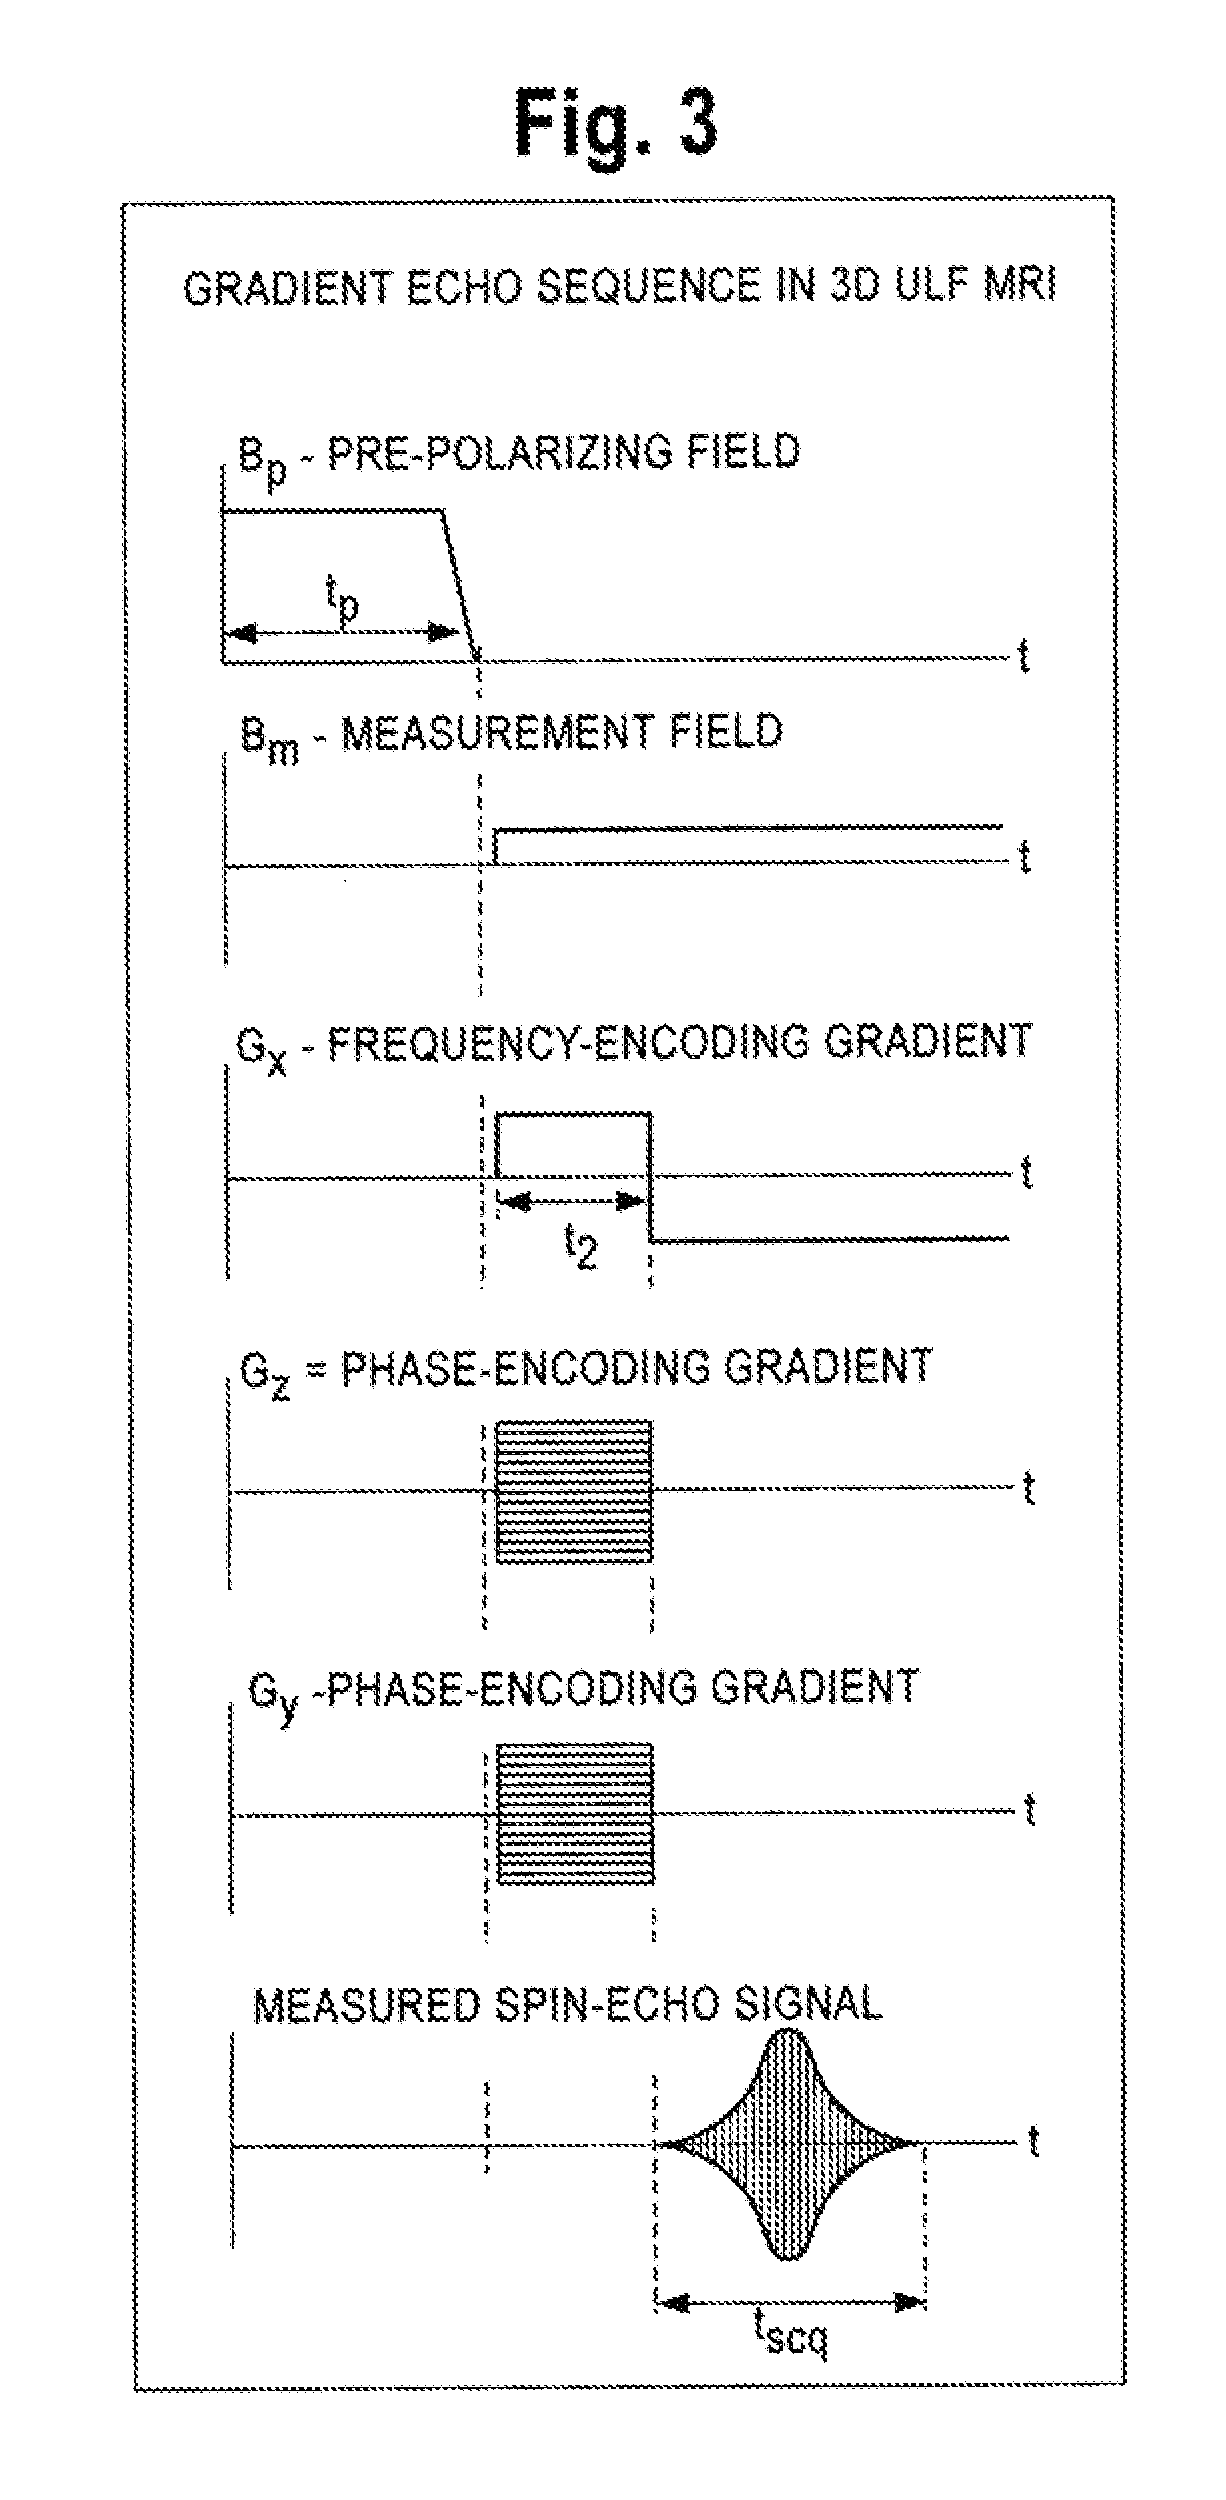 Method of performing MRI with an atomic magnetometer